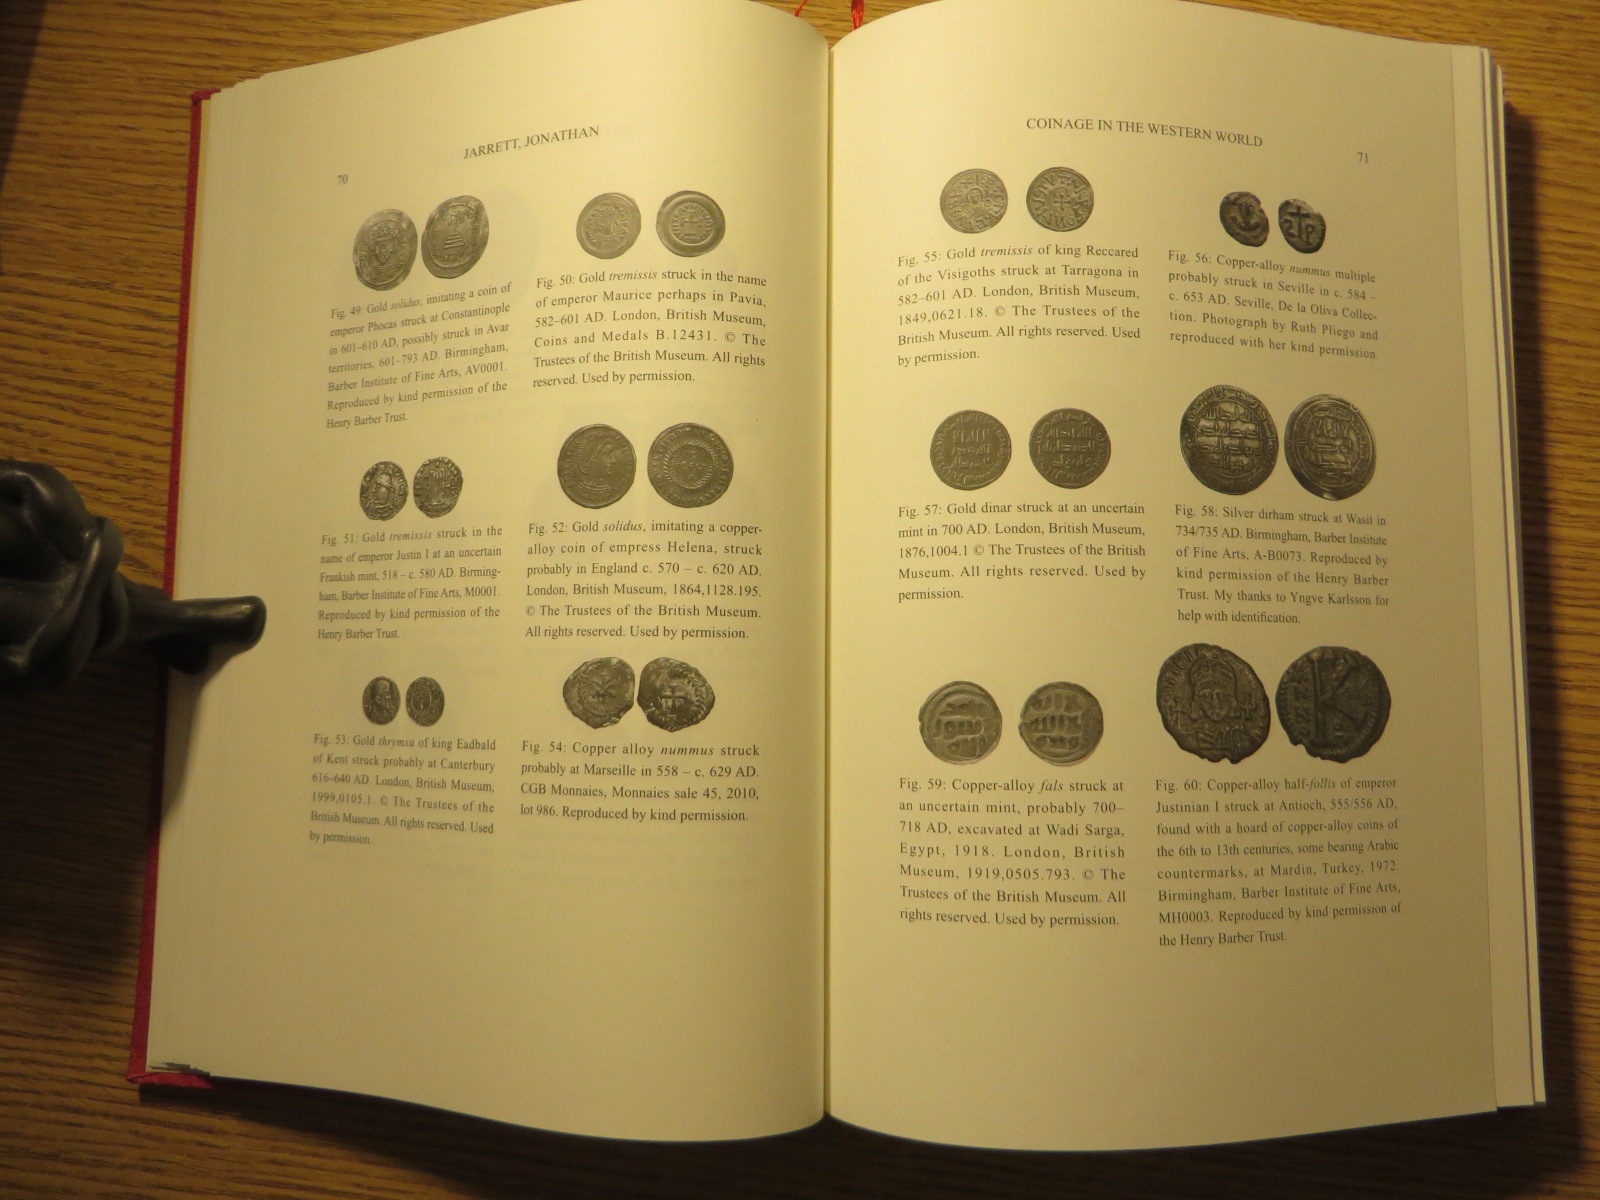 Figures 49–60 of Jonathan Jarrett, "Coinage in the Western World at the End of the Roman Empire and After: Tradition, Imitation and Innovation" in Sven Günther, Li Qiang, Lin Ying & Claudia Sode (edd.), From Constantinople to Chang’an: Byzantine Gold Coins in the World of Late Antiquity, Supplements to the Journal of Ancient Civilizations 8 (Changchun 2021), pp. 31–74 at pp. 70–71